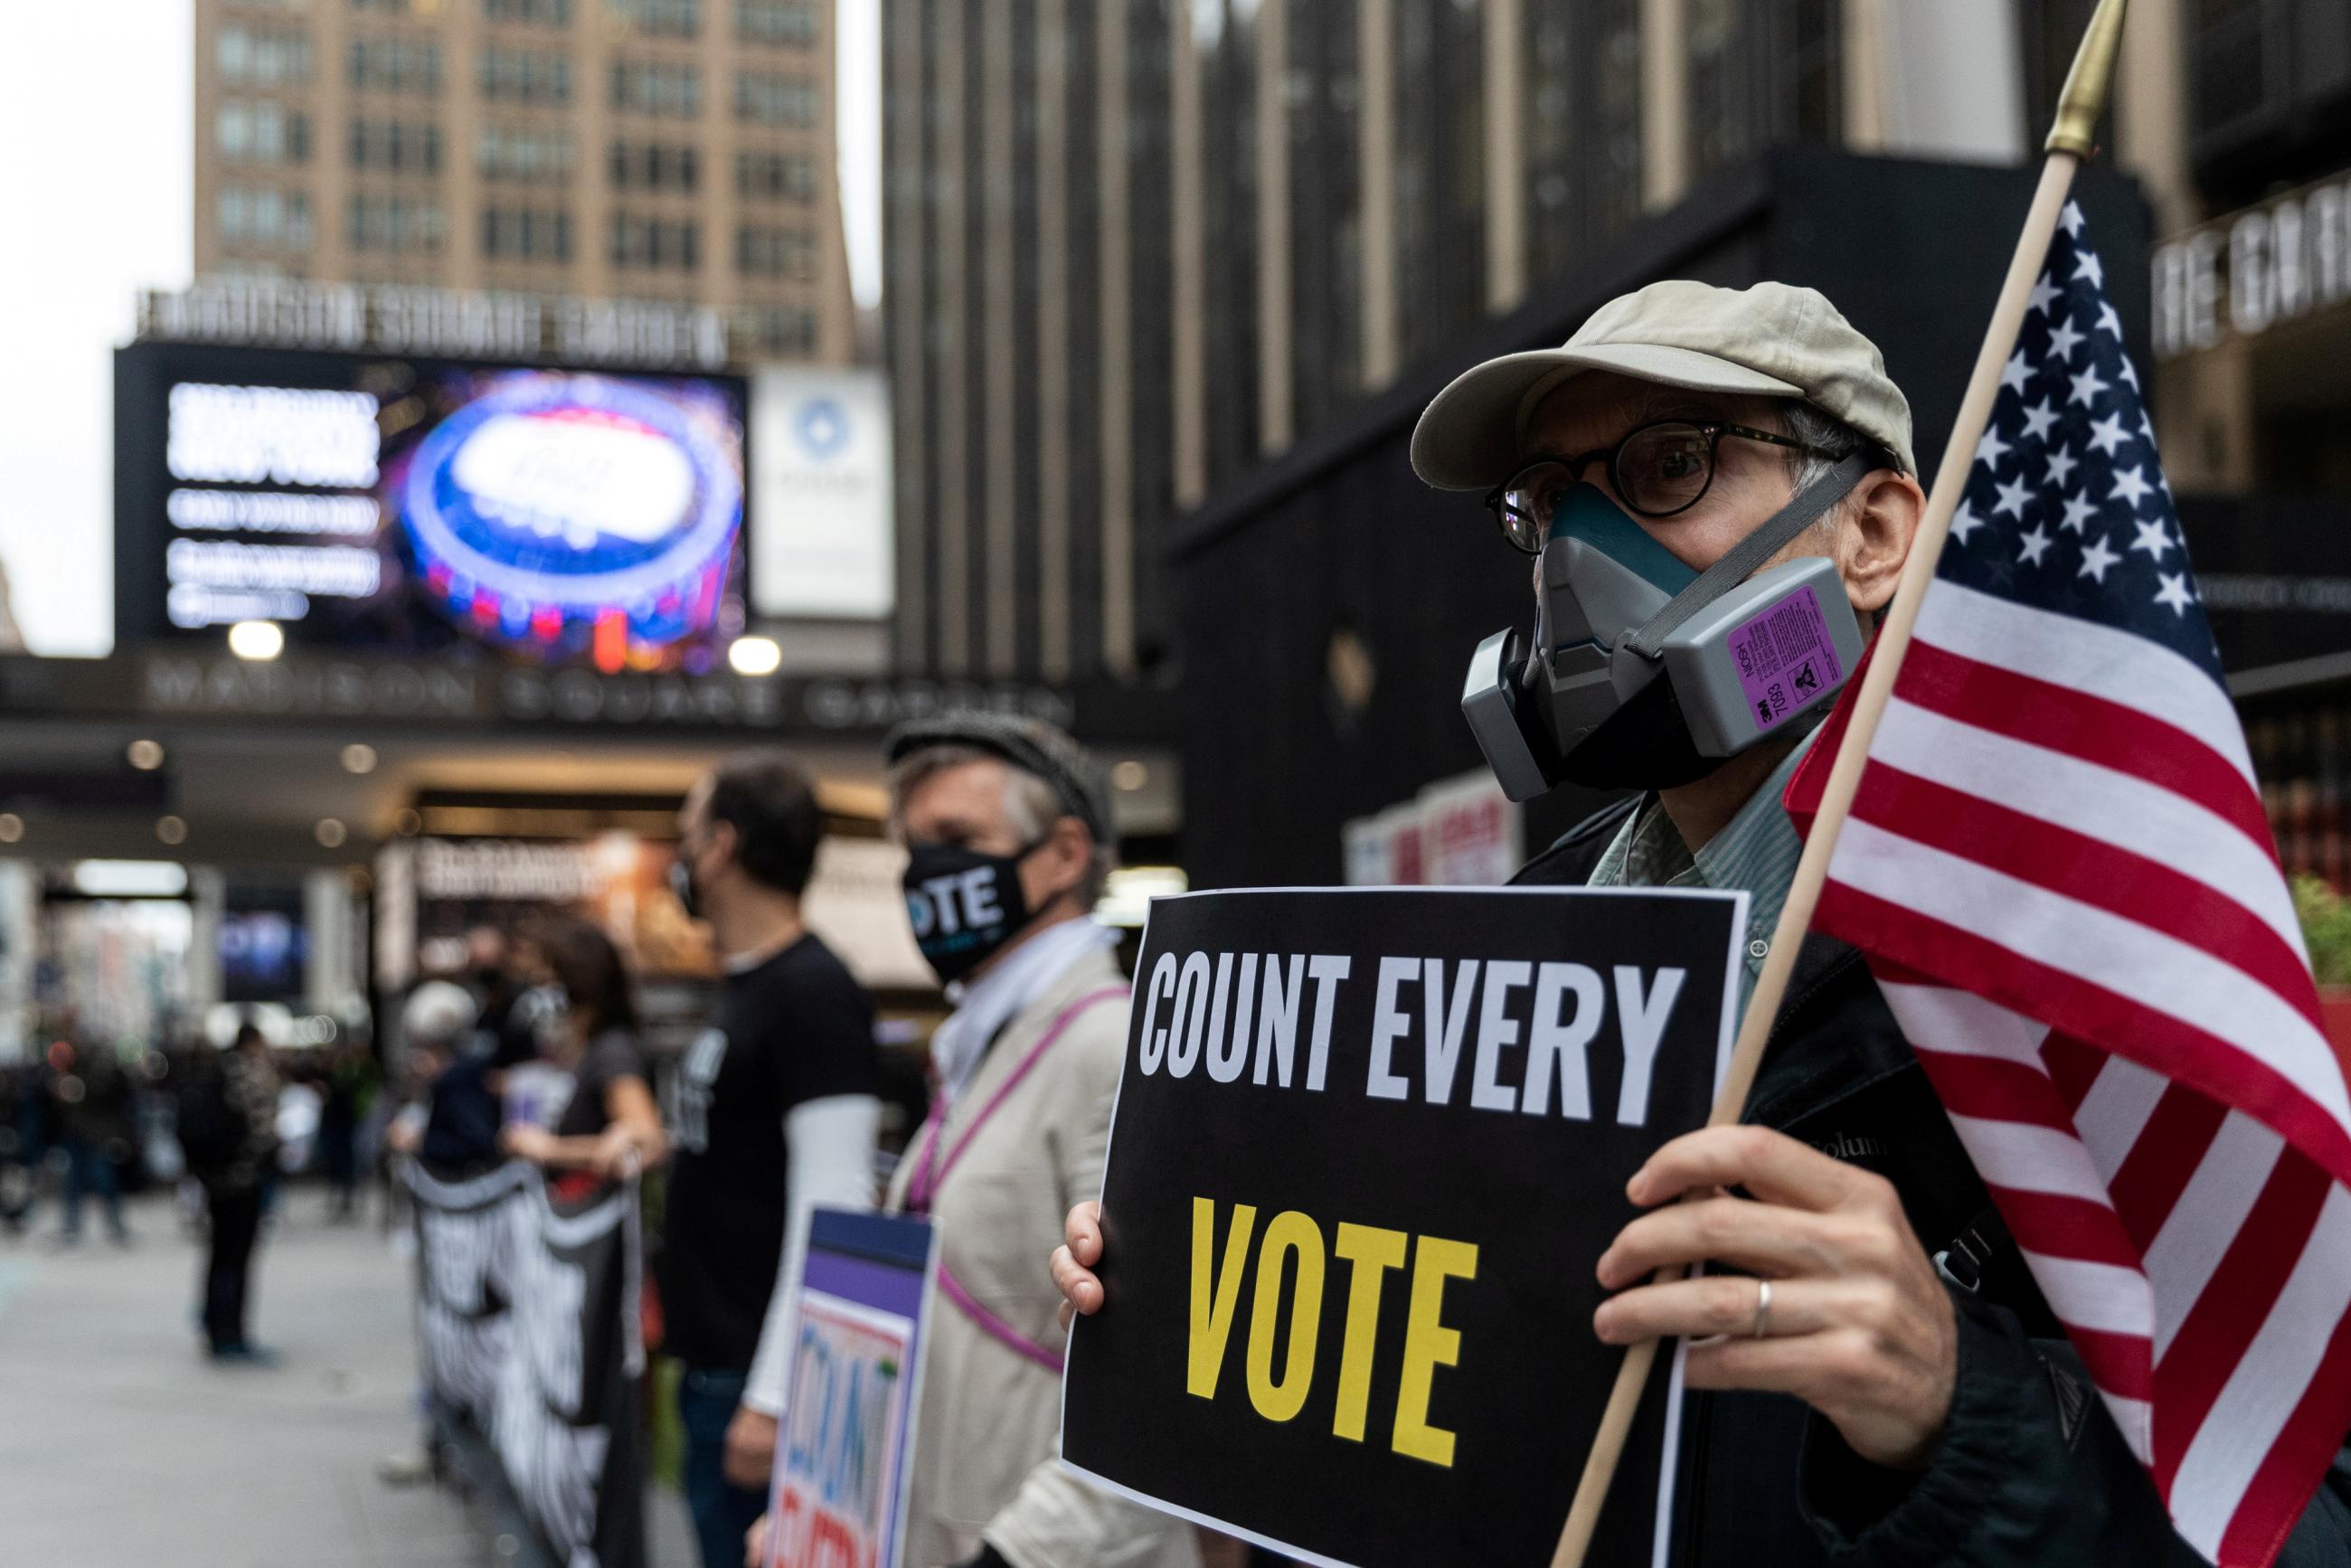 An older man wearing a respirator-style protective mask due to COVID-19 pandemic holds a sign outside Madison Square Garden, which is used as a polling station, on the first day of early voting in Manhattan, New York.